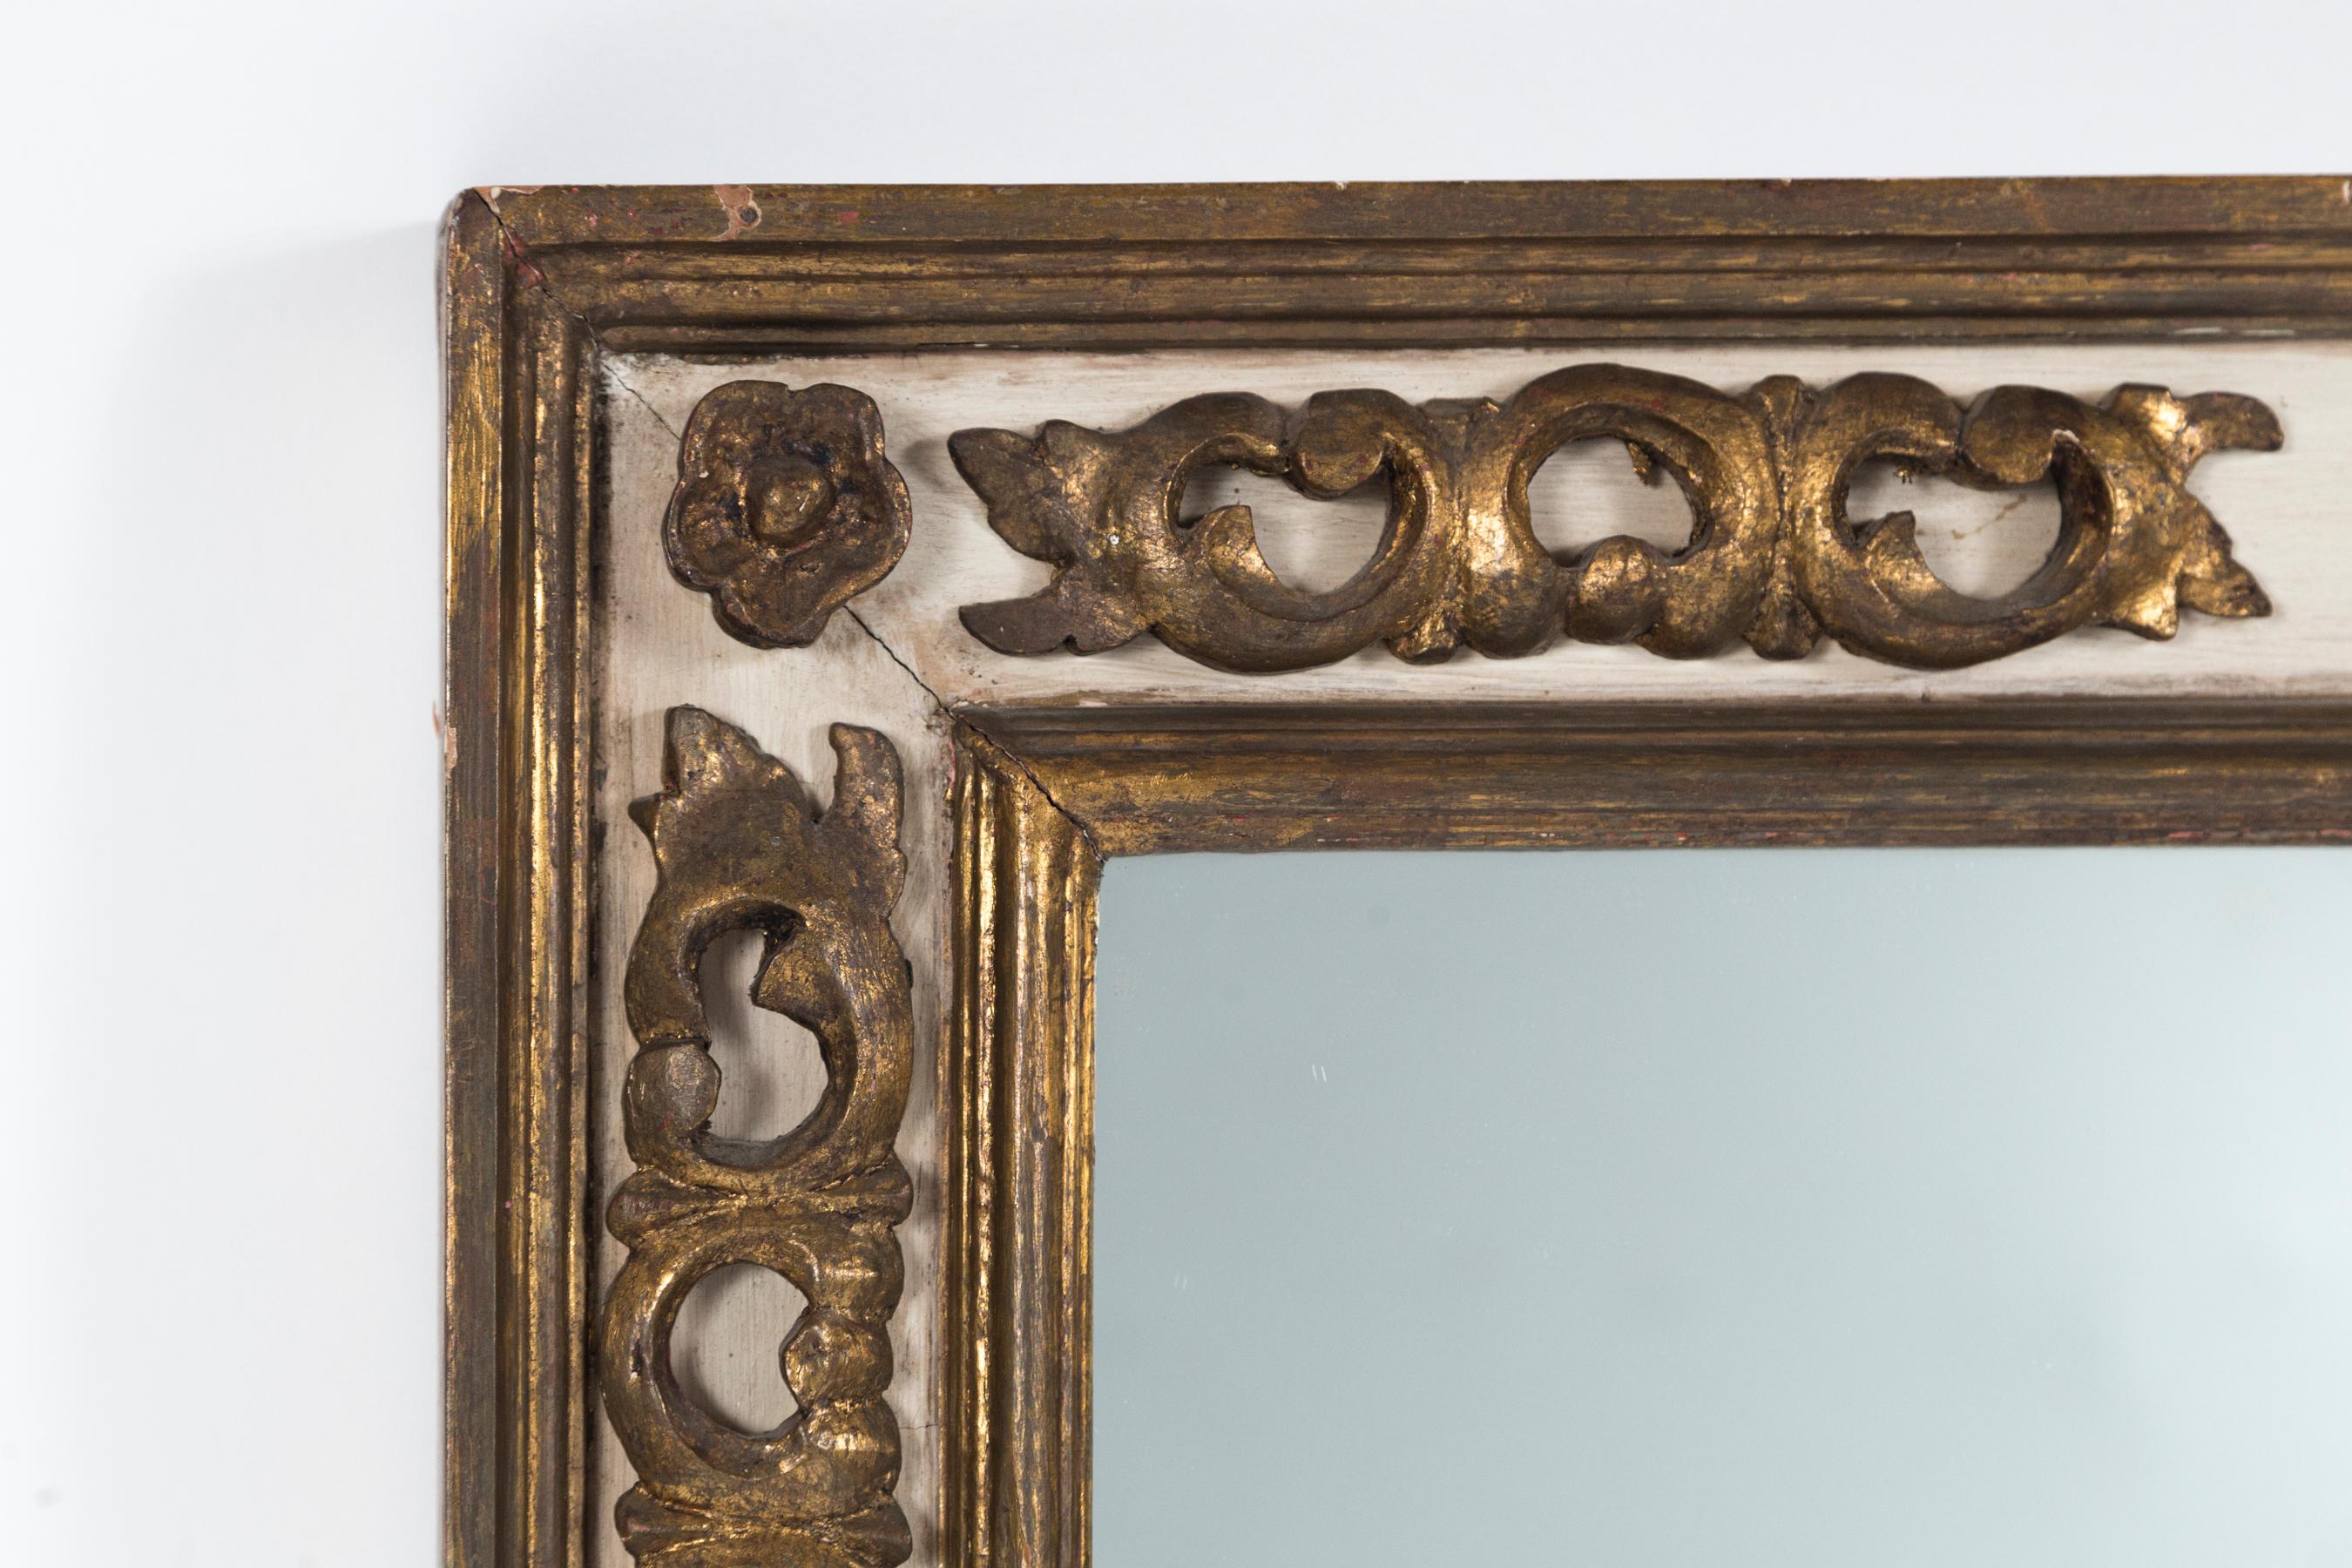 Florentine style gilded mirror, mid-20th century. Carved and gilded floral design on off-white painted panels within double moldings. Large, rectangular size frame with lovely burnished patina.